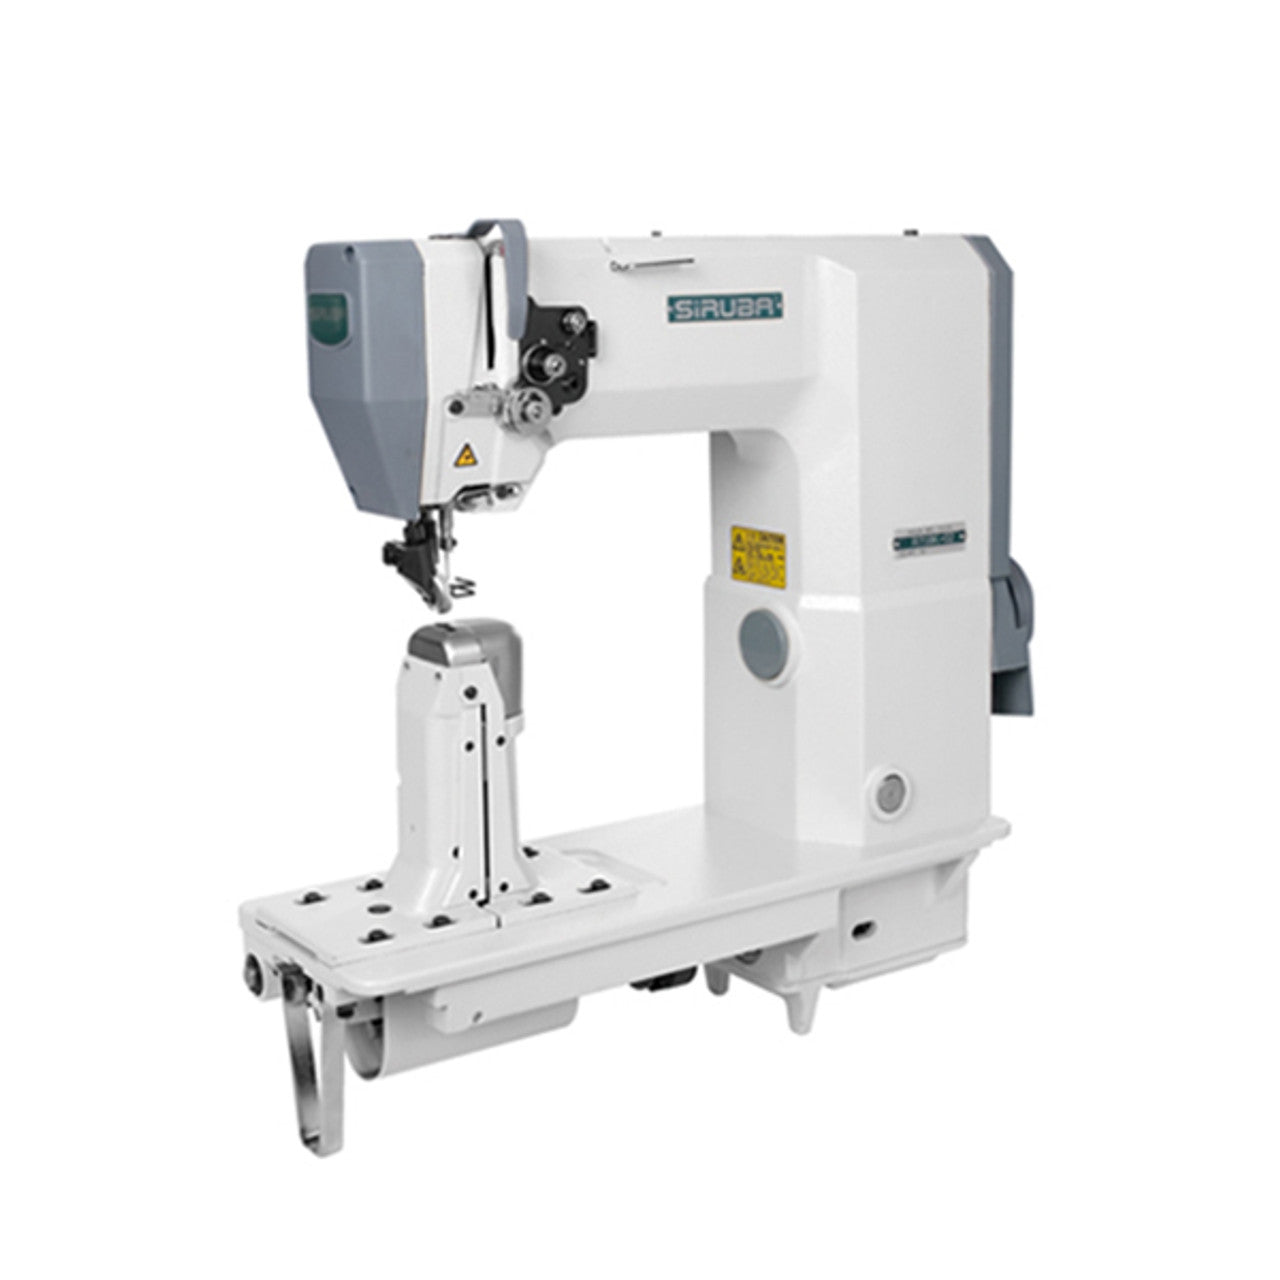 SIRUBA R718K-02 Single Needle Post-bed Top, Bottom and Needle Feed Lockstitch Industrial Sewing Machine with Servo Motor, Table and Stand Included